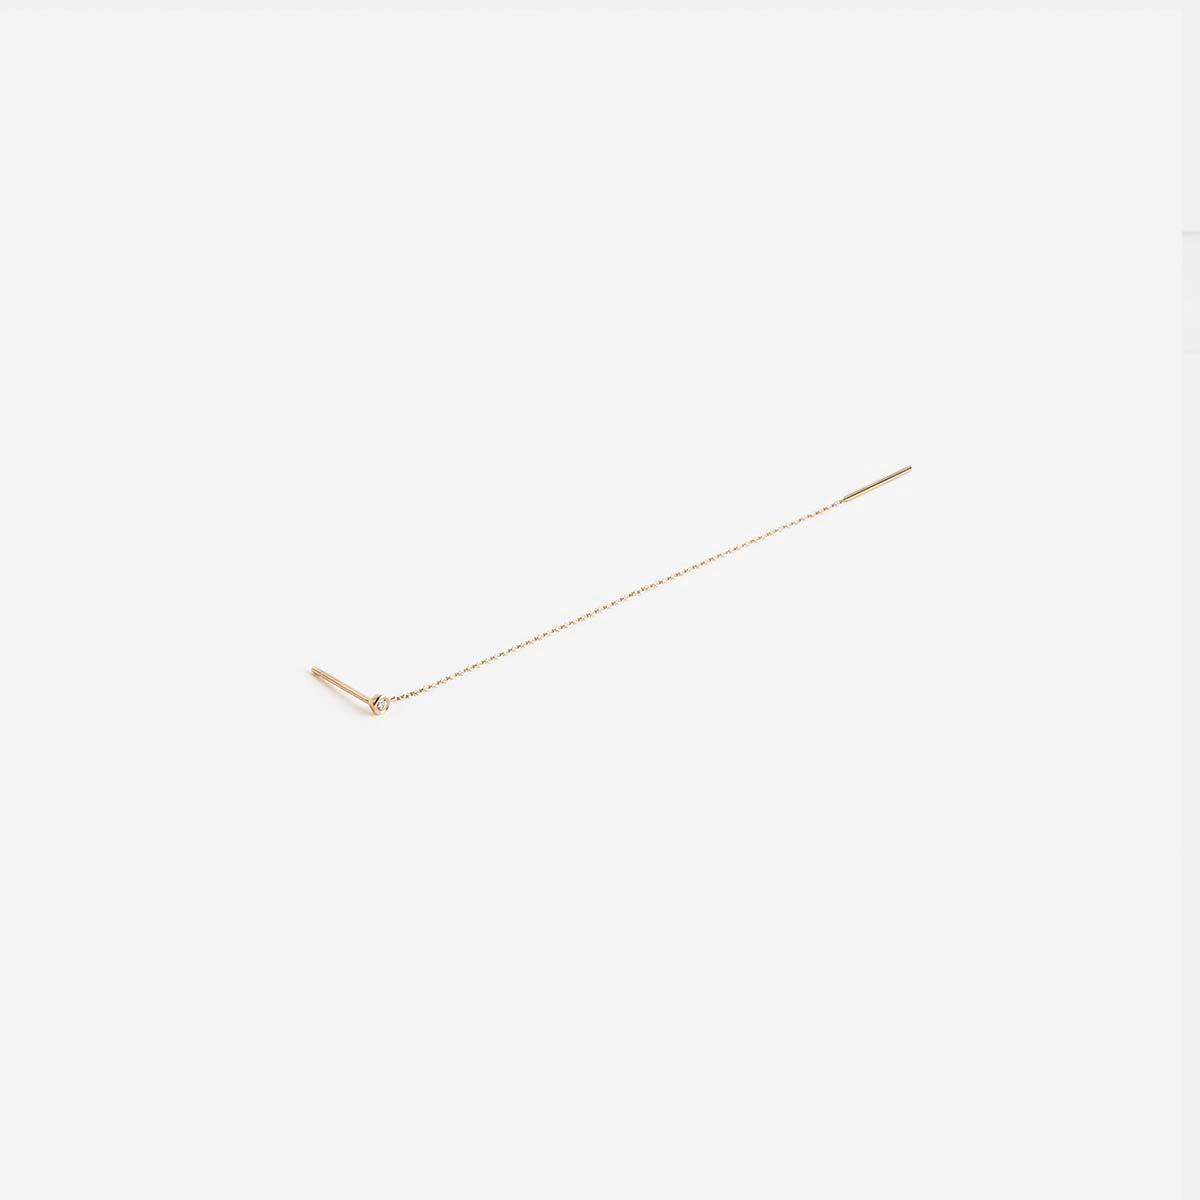 Vesa Non-traditional Threader Earring in 14k Gold set with White Diamond By SHW Fine Jewelry NYC